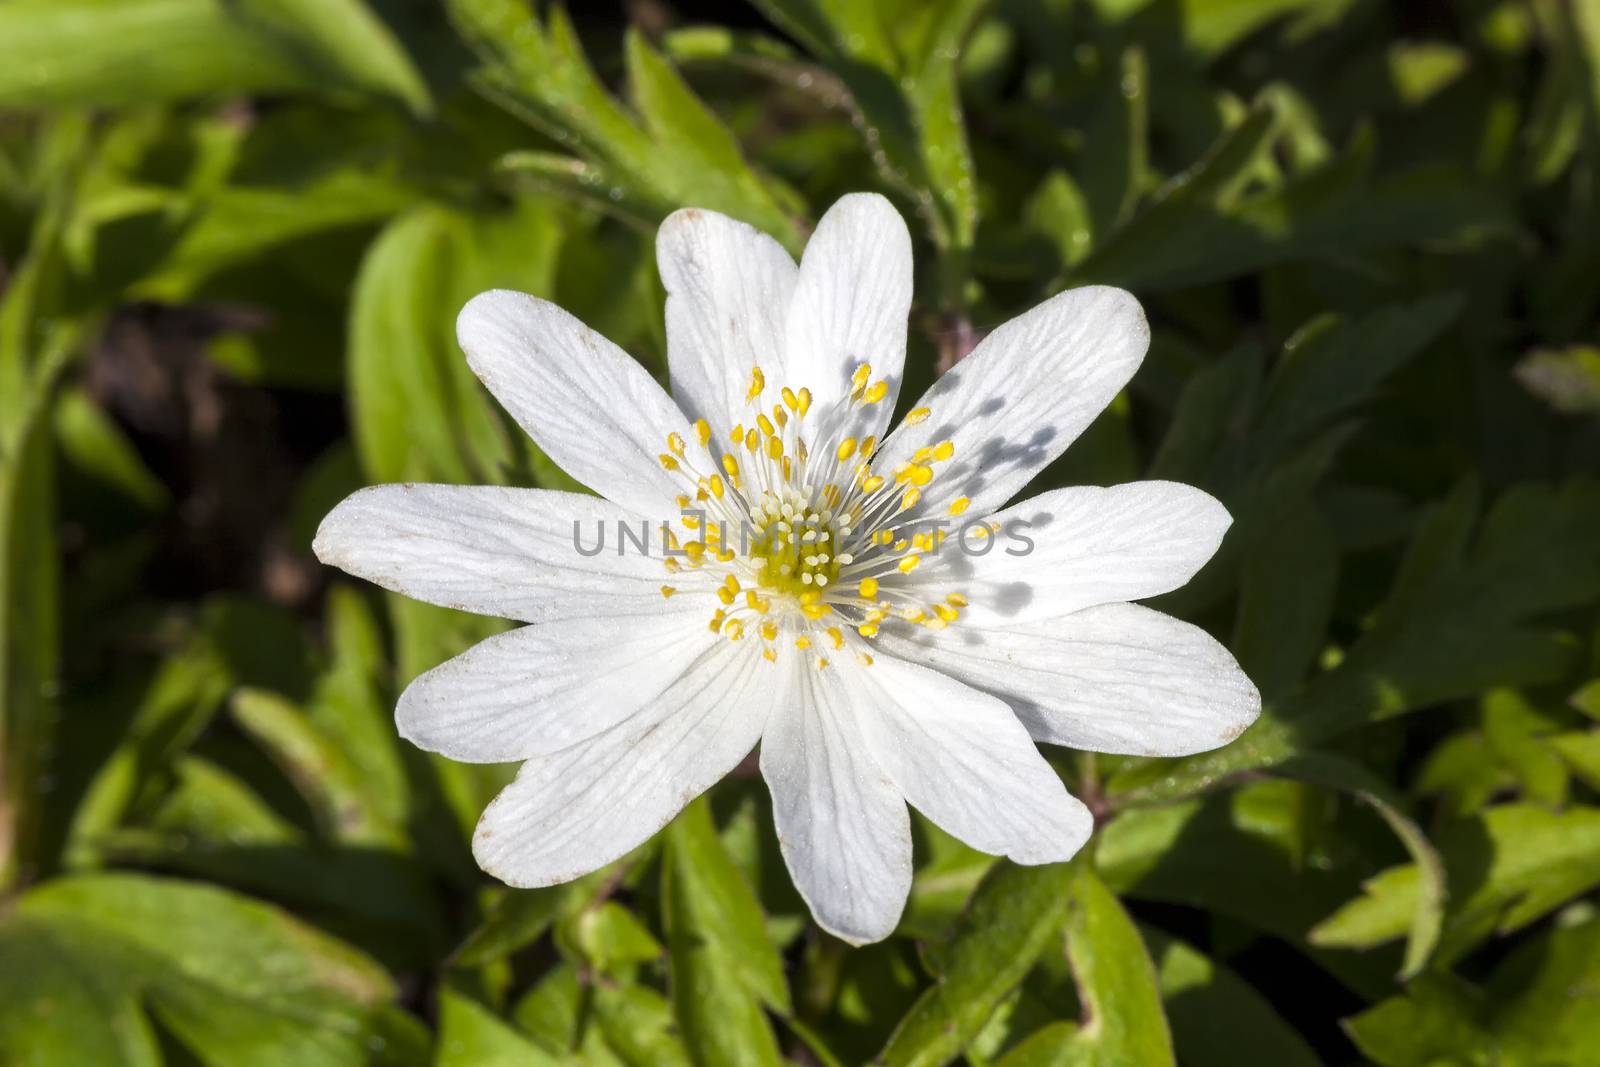 Anemone nemorosa 'Monstrosa' a white spring flowering plant commonly known as wood anemone or windflower